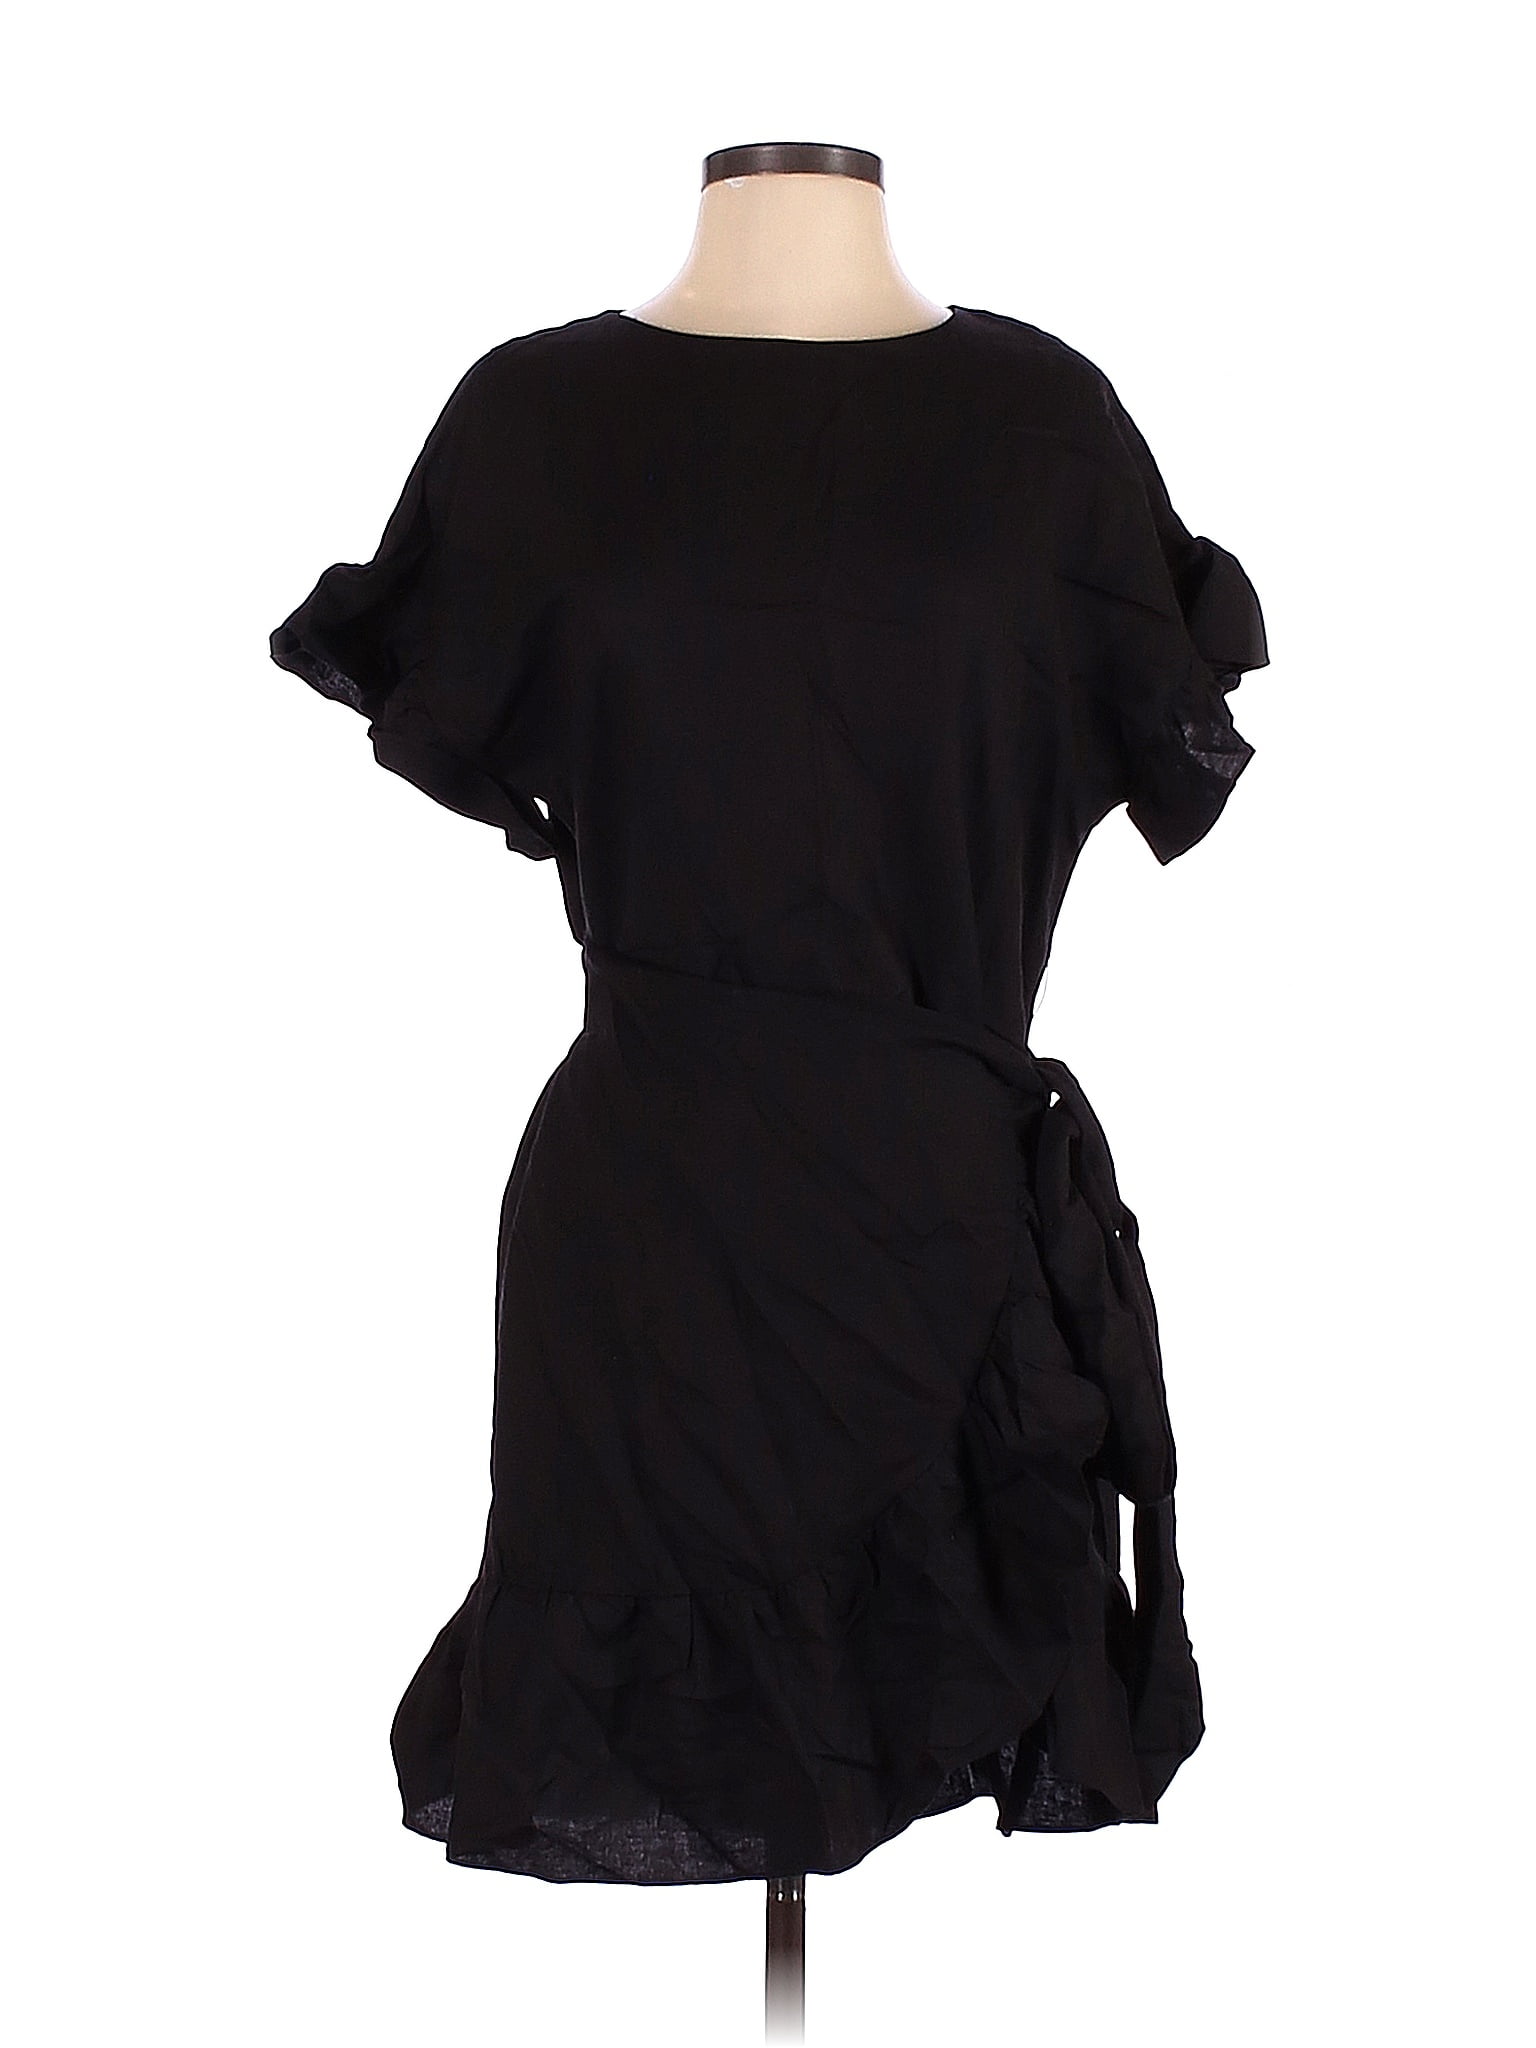 ASTR The Label Black Casual Dress Size XS - 77% off | thredUP